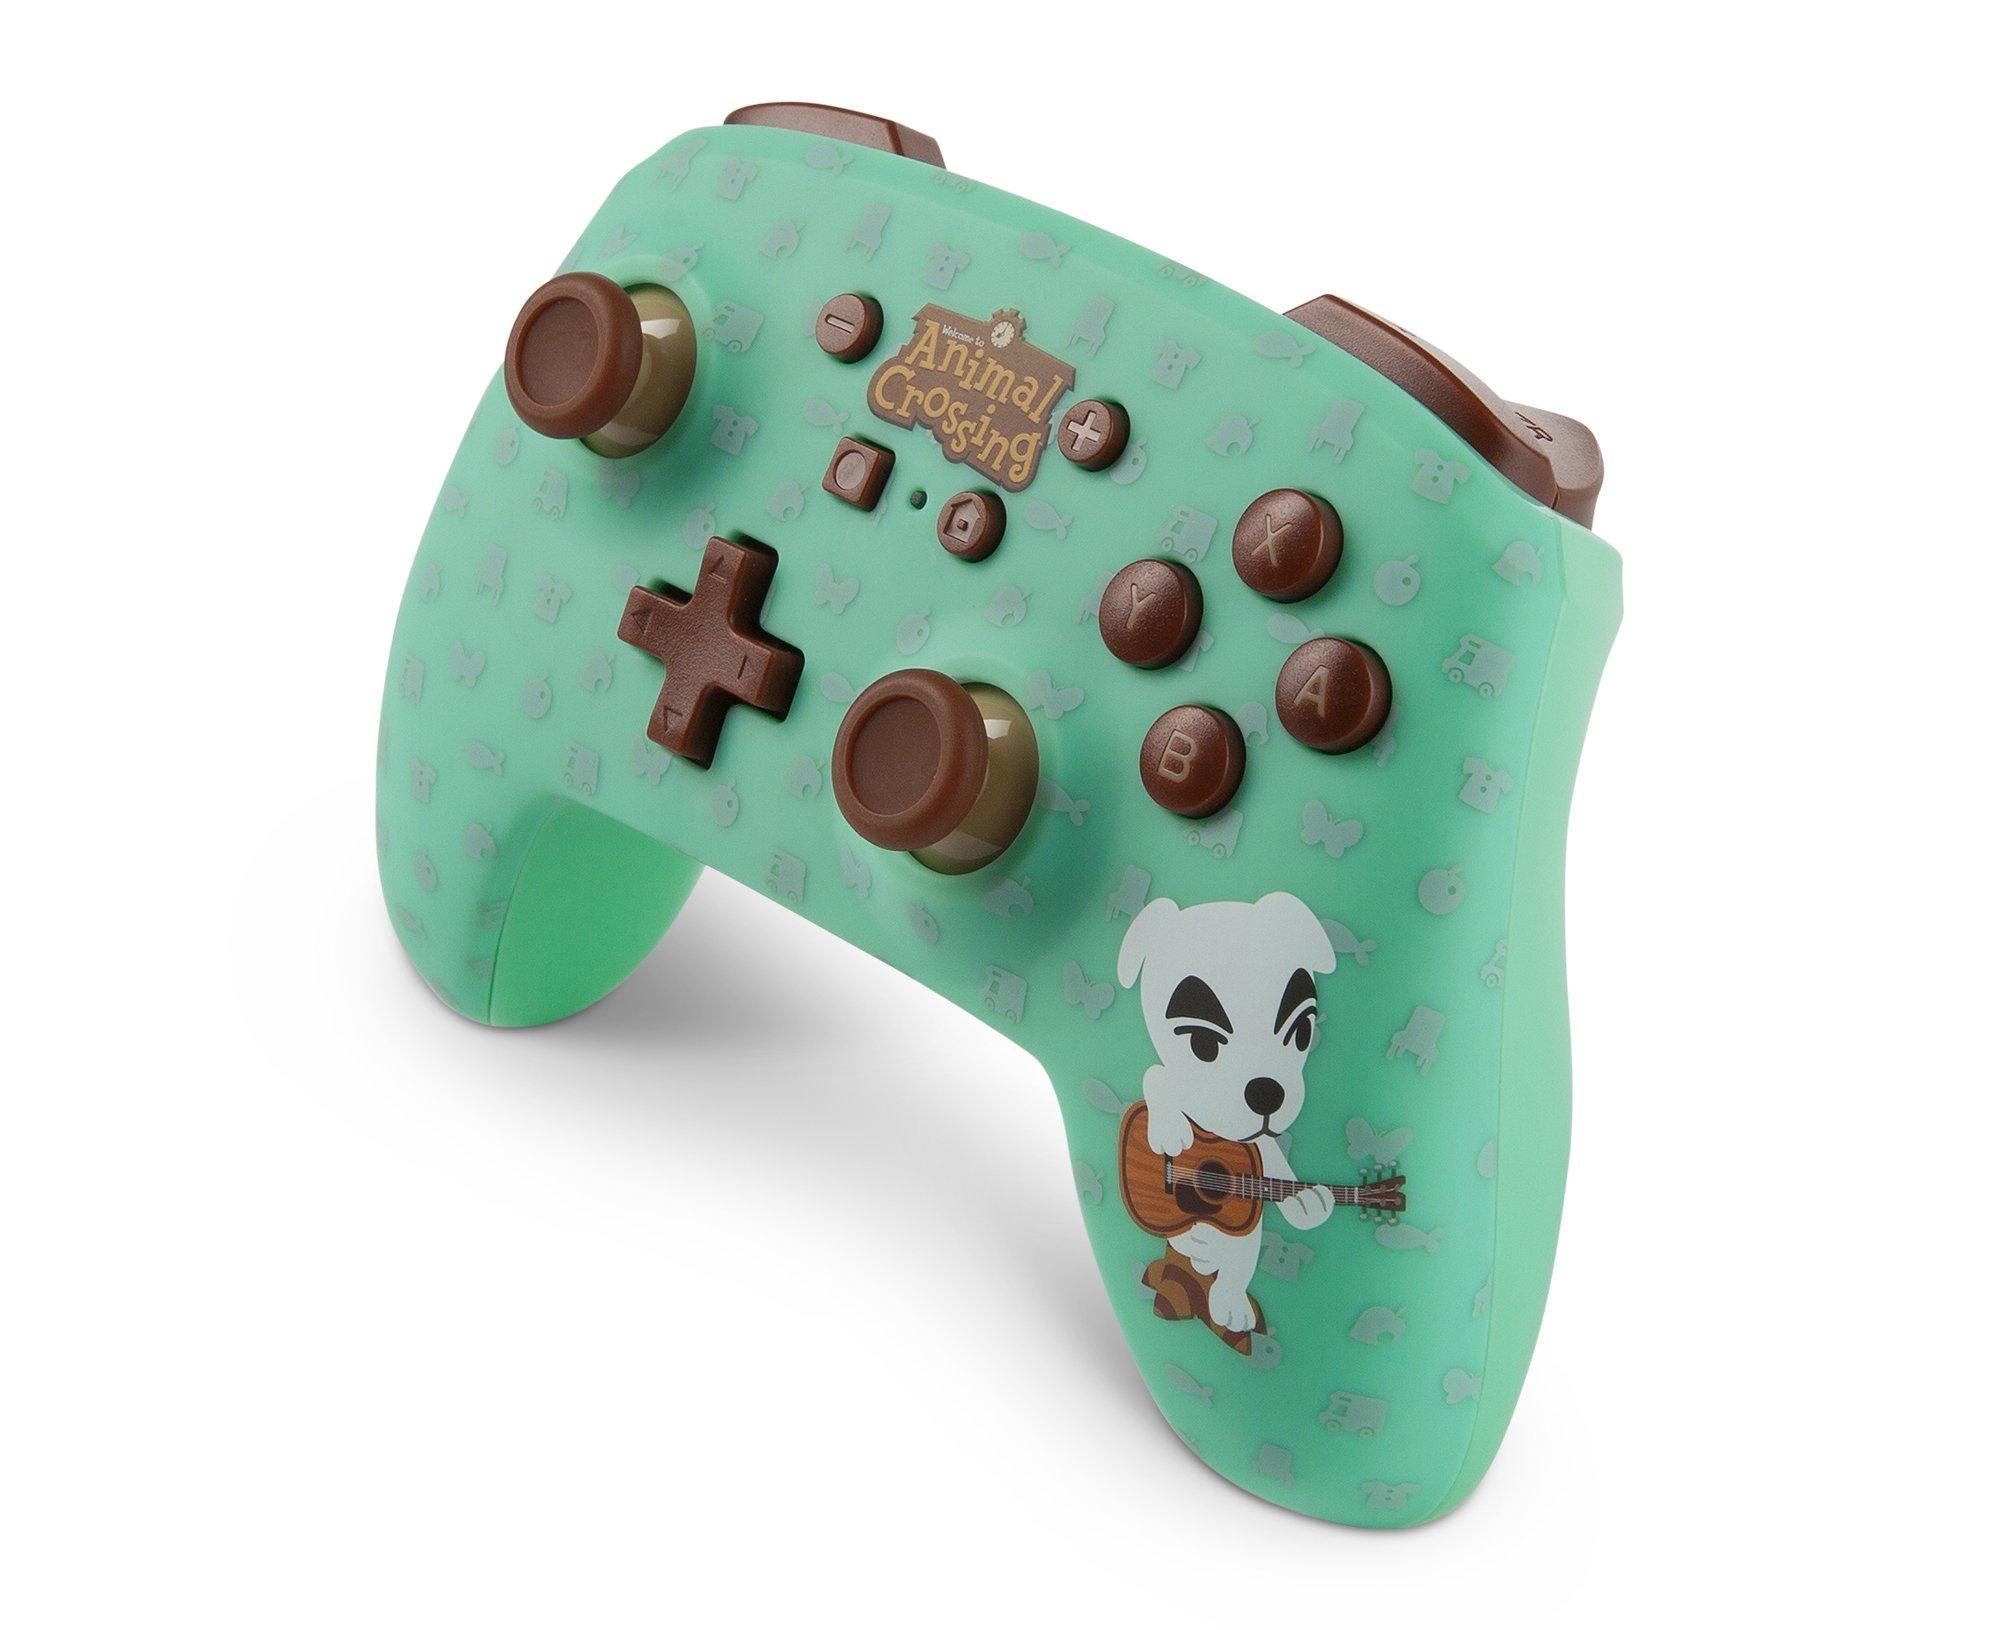 can you use pro controller for animal crossing